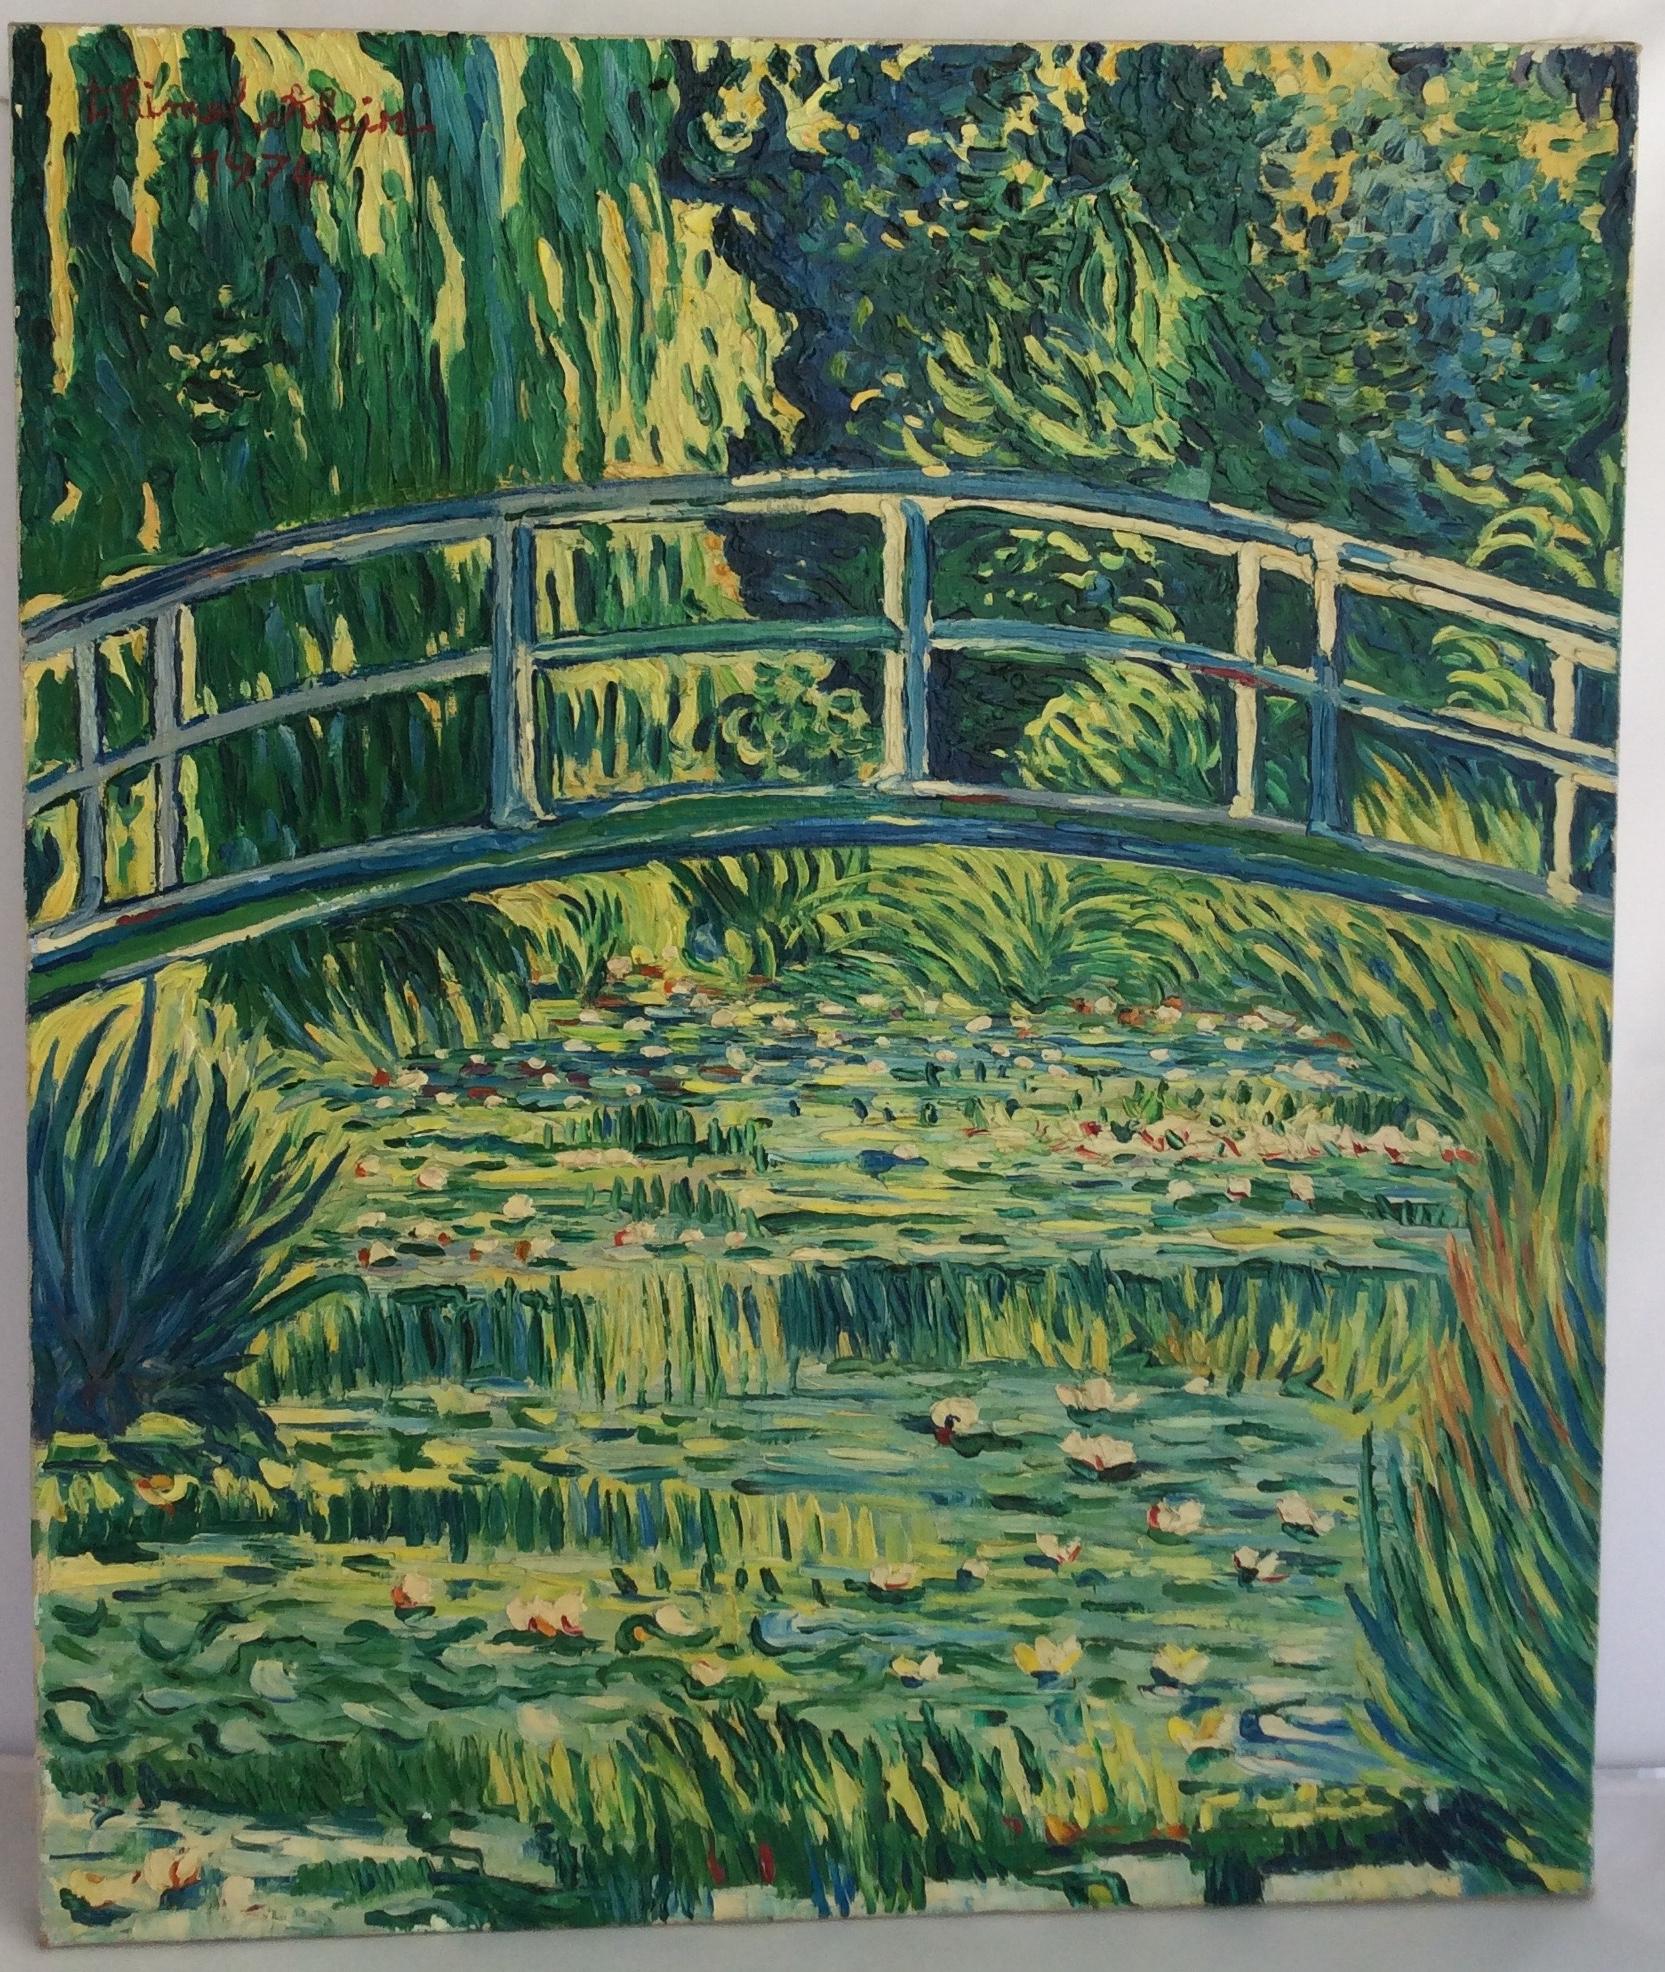 French Post Impressionist Painting After Monet, Signed Alain Thimel 2